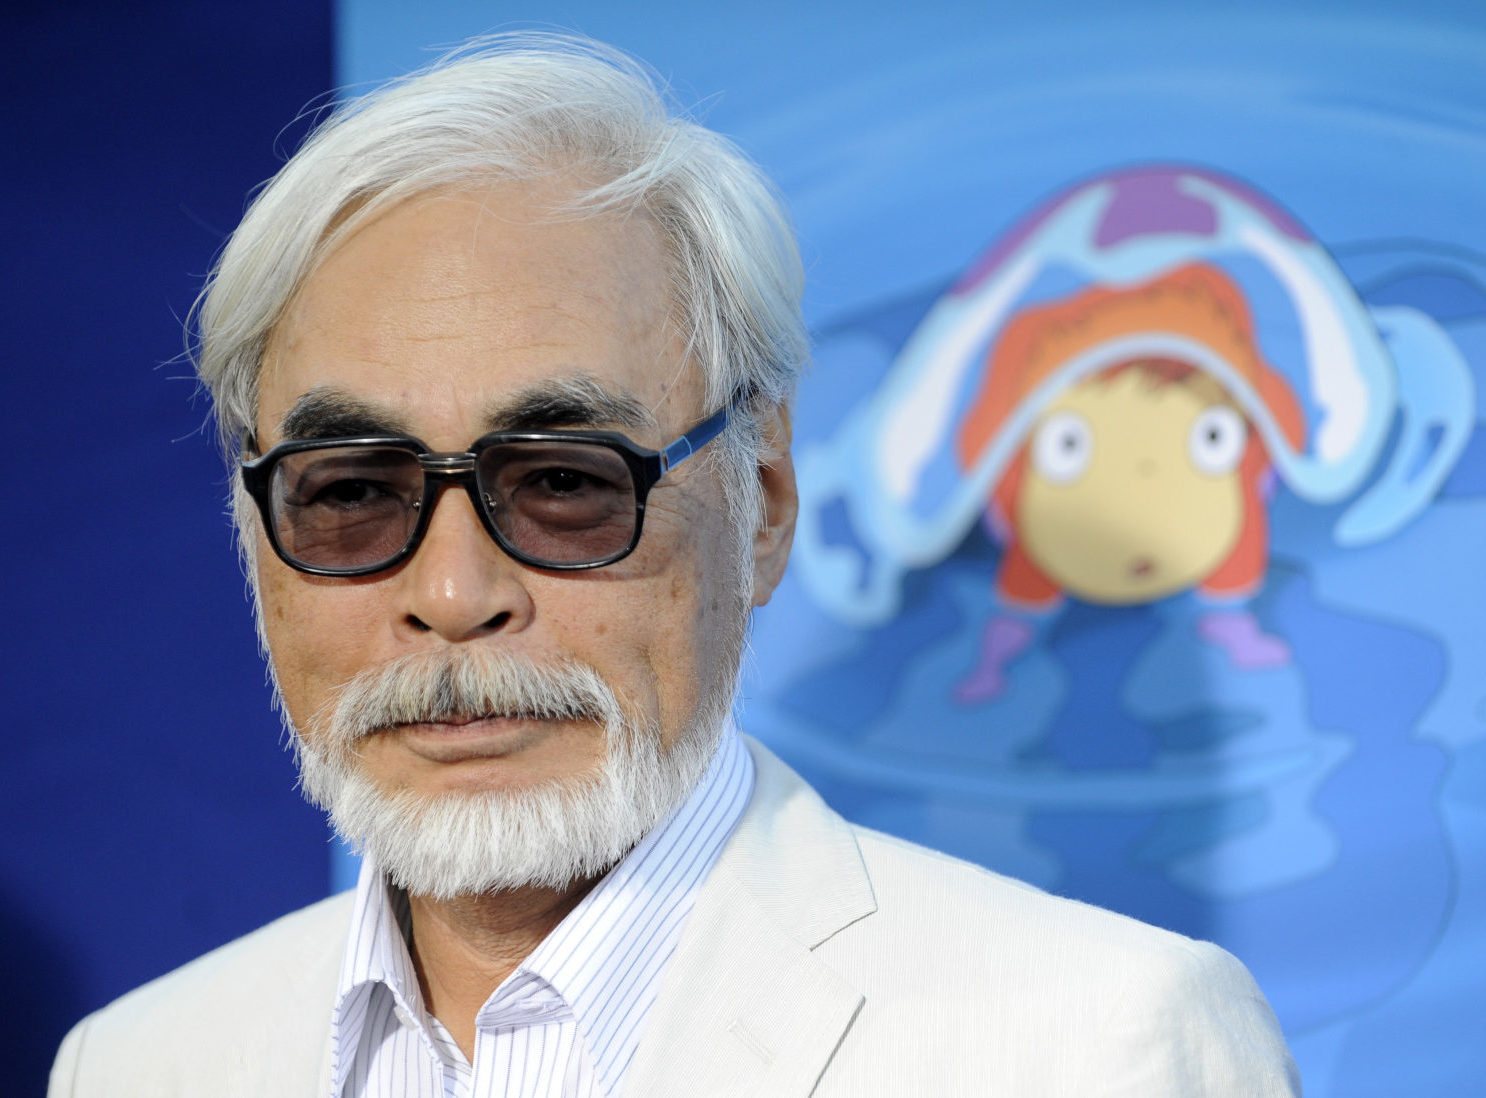 Hayao Miyazaki of Japan, director of the animated film "Ponyo," poses at a special screening of the film in Los Angeles, Monday, July 27, 2009. (AP Photo/Chris Pizzello)